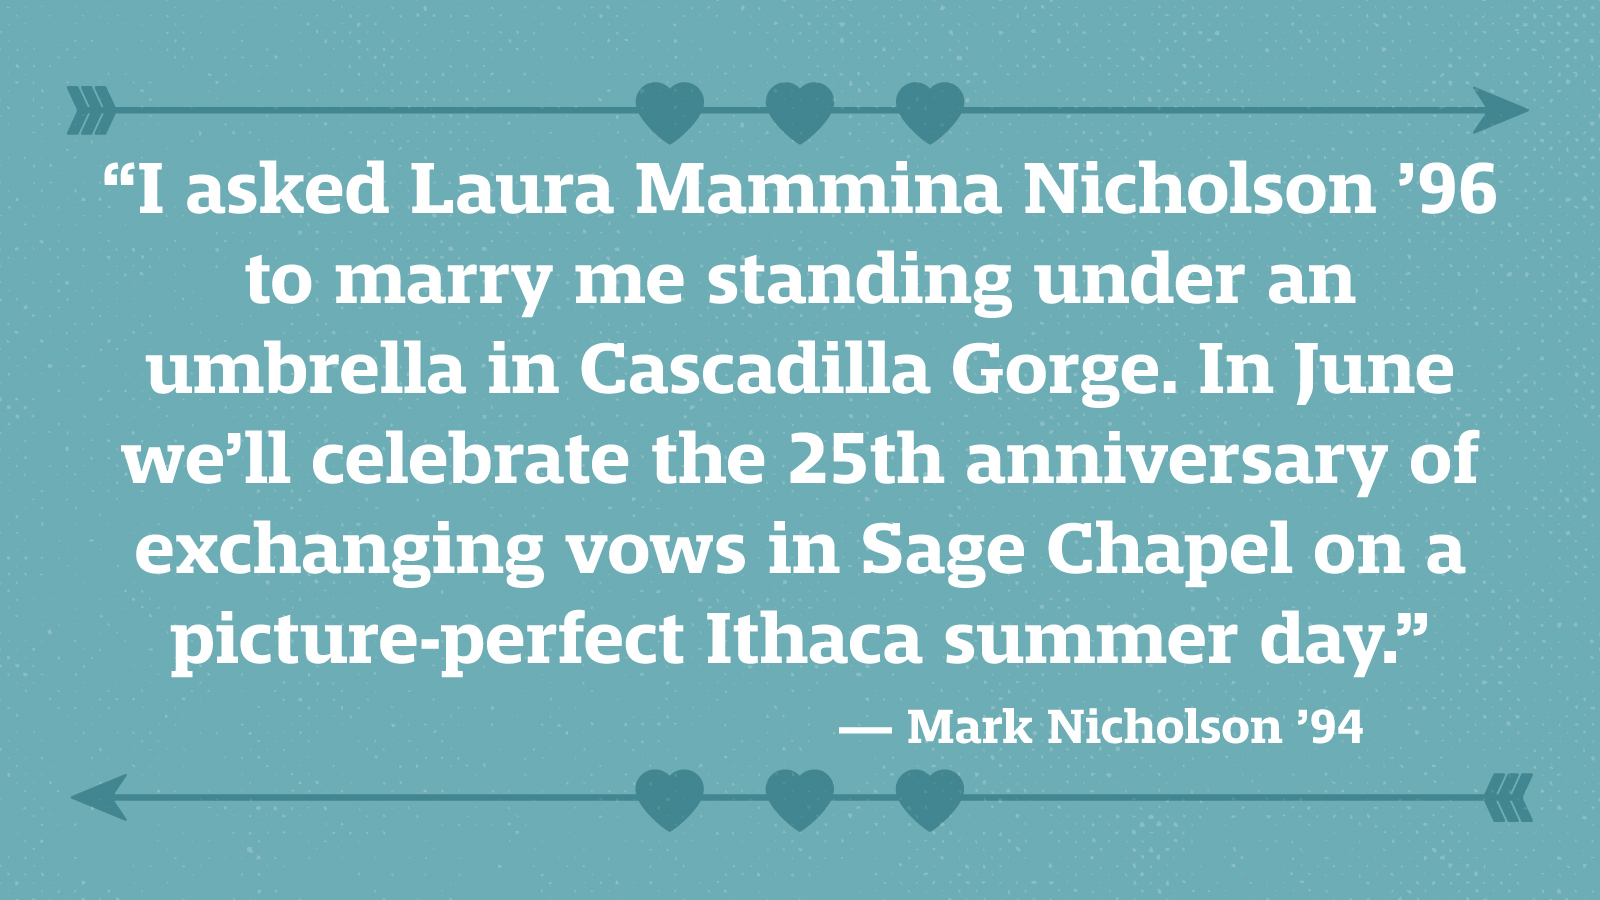 “I asked Laura Mammina Nicholson ’96 to marry me standing under an umbrella in Cascadilla Gorge. In June we’ll celebrate the 25th anniversary of exchanging vows in Sage Chapel on a picture-perfect Ithaca summer day.” — Mark Nicholson ’94